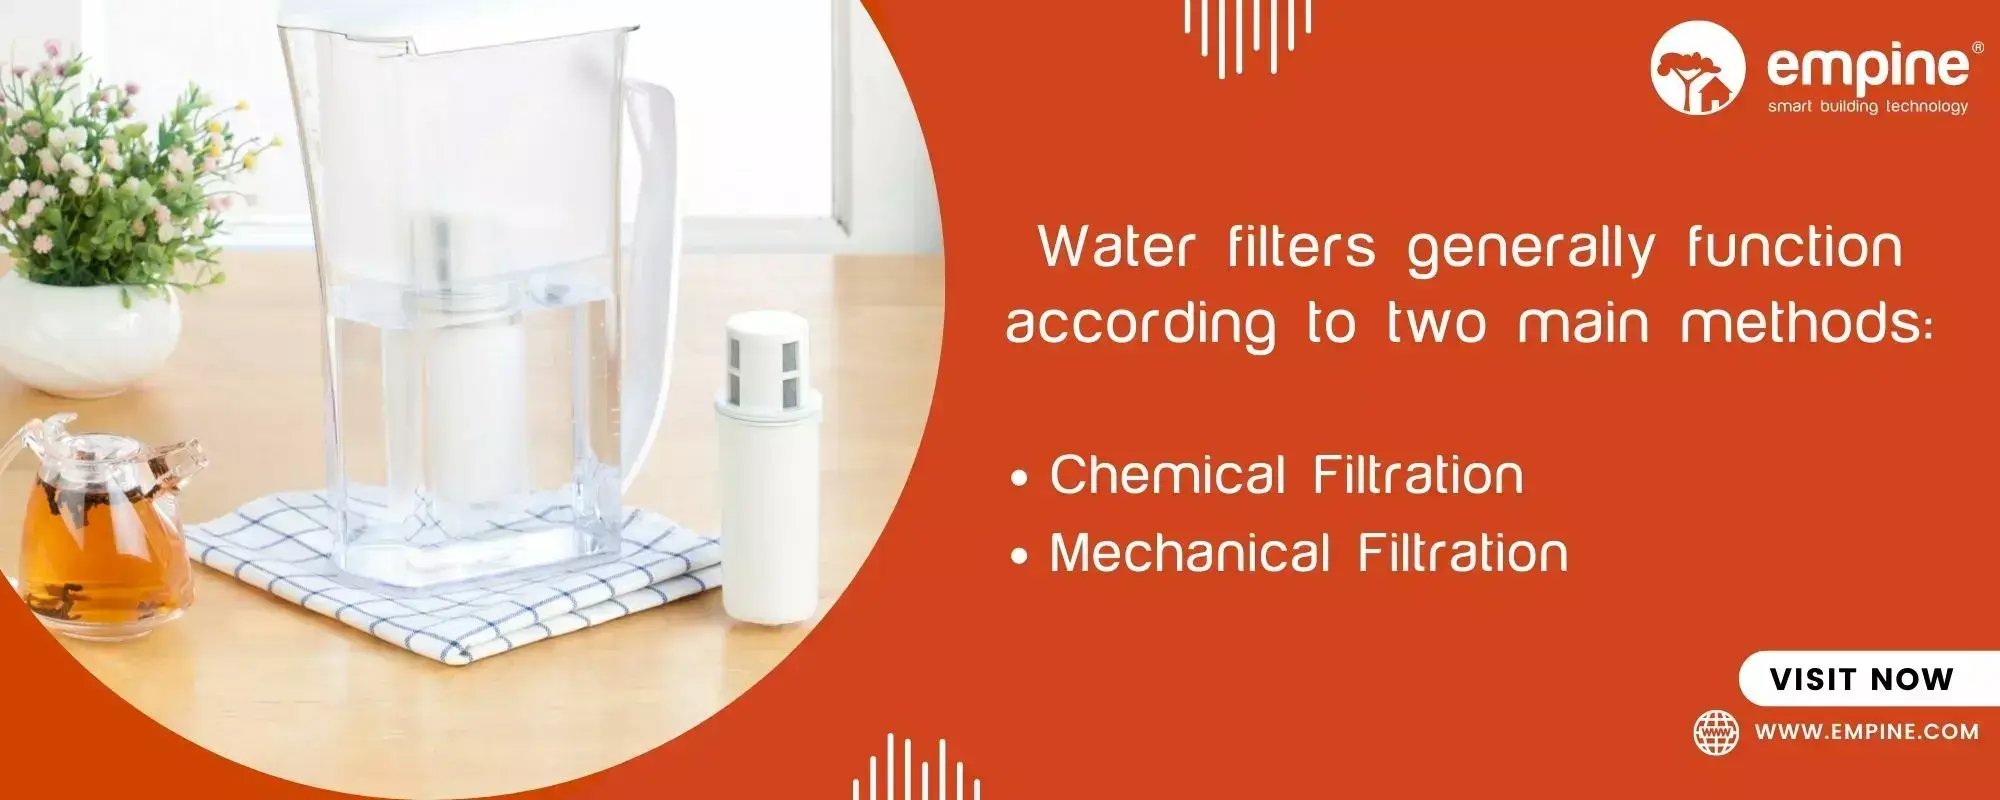 Blog 24 - Water Filters - Image 1